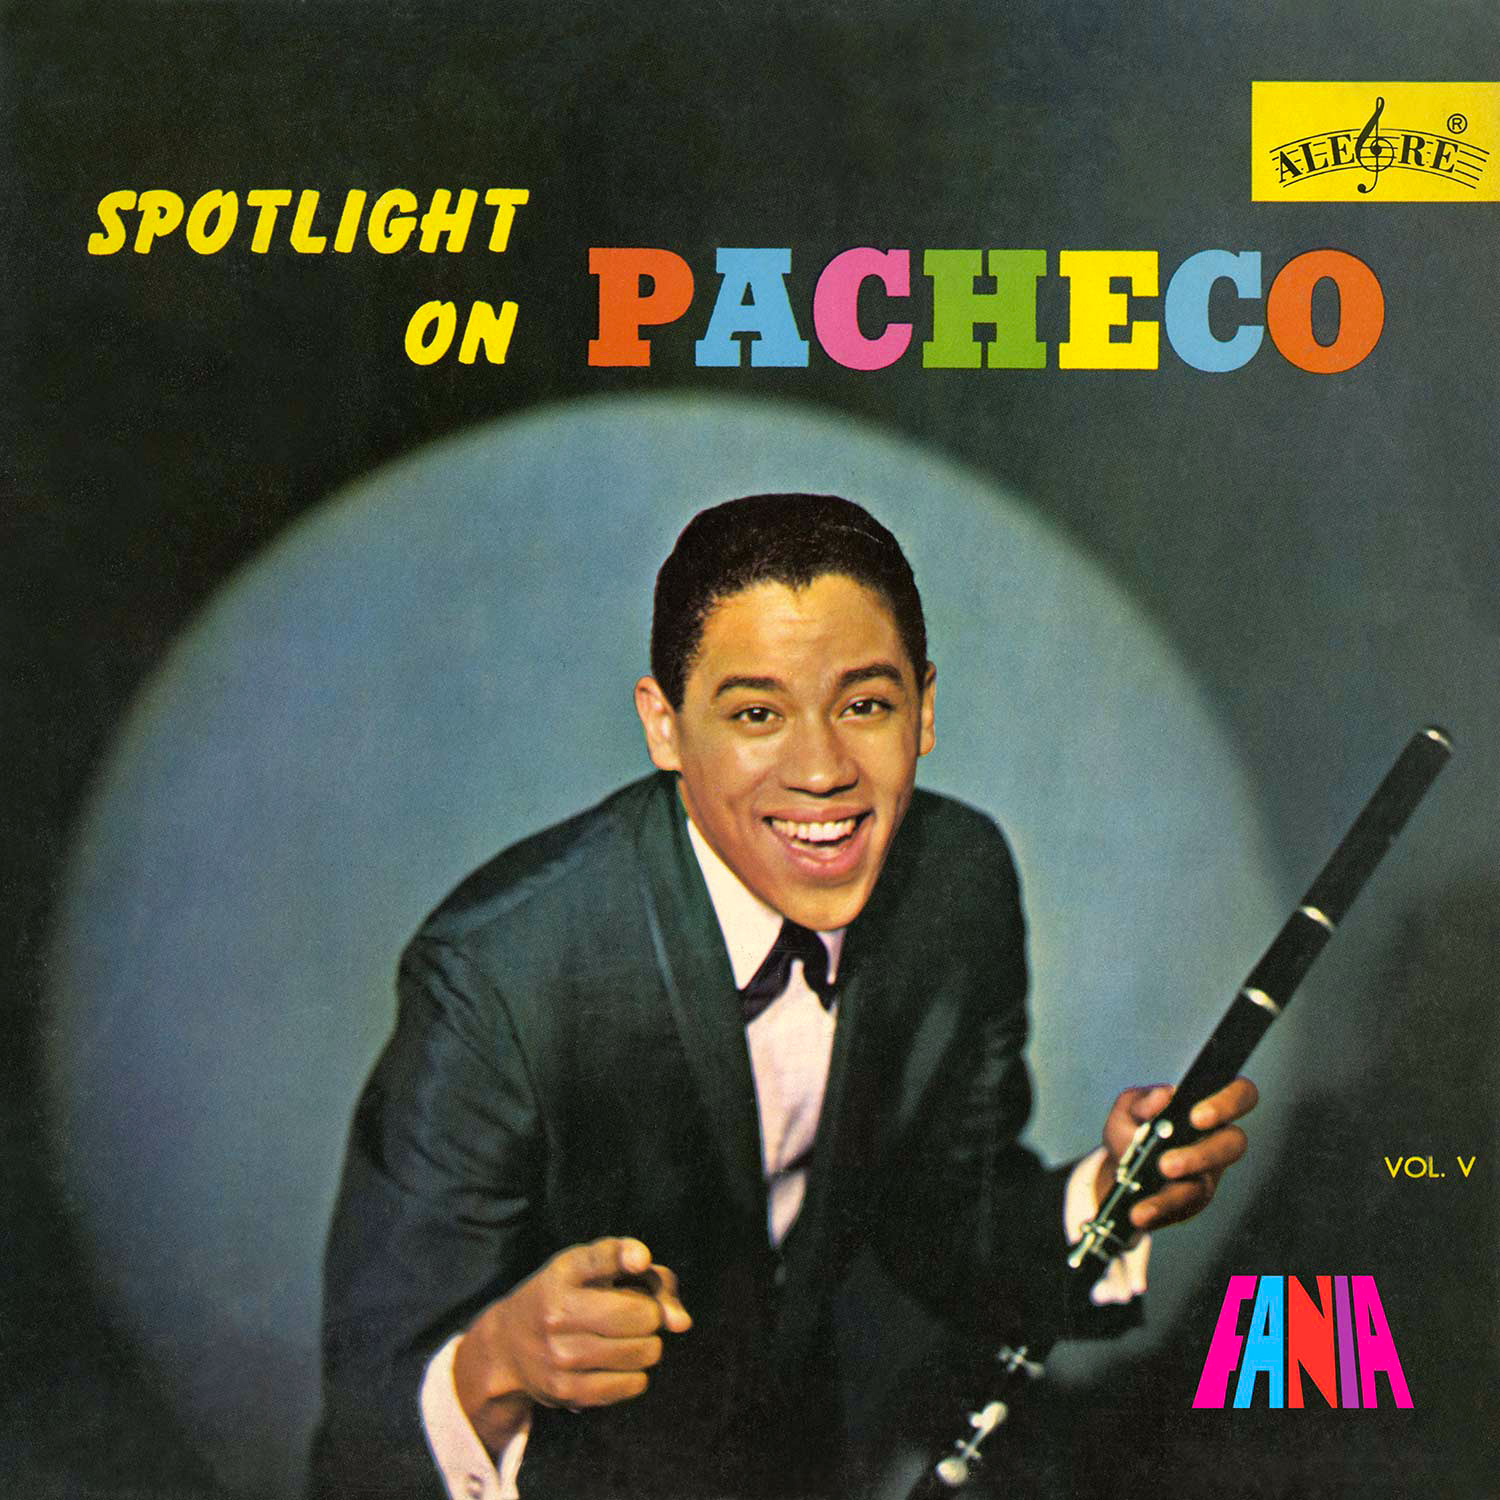 Album cover photograph showing a man in a suit and holding a flute, pointing at the camera. 